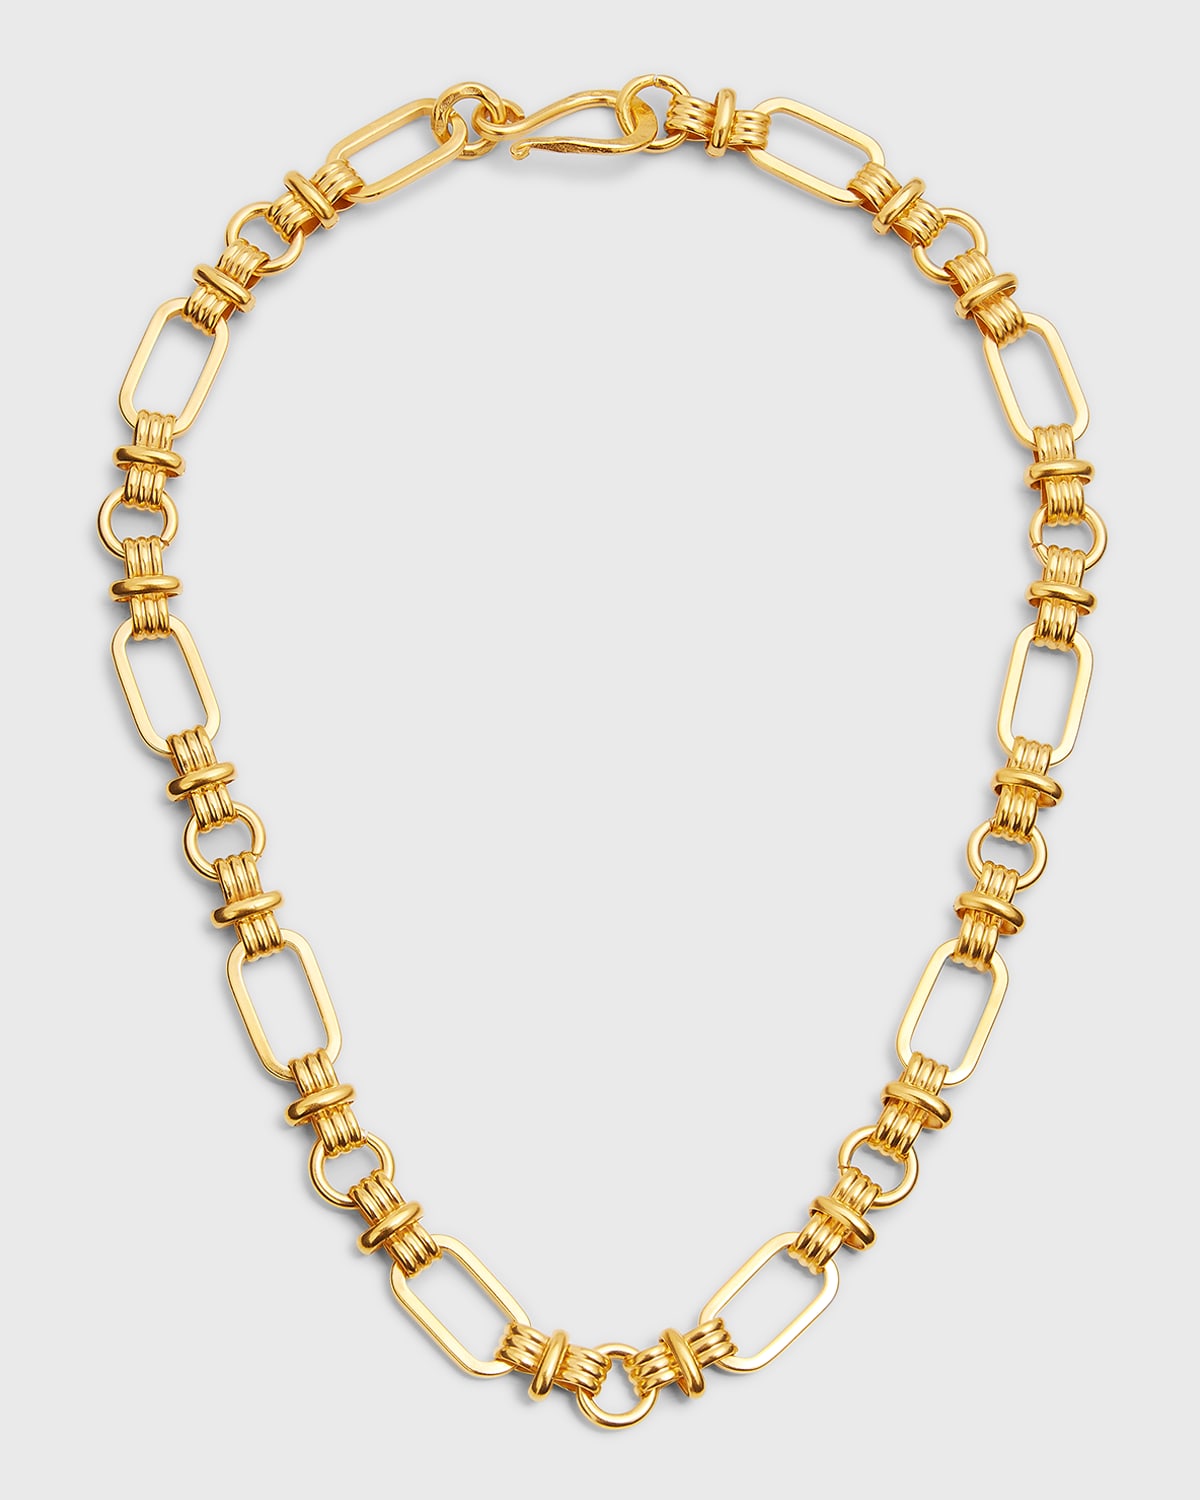 Dina Mackney Nouveau Chain Smooth Link Necklace with Connectors